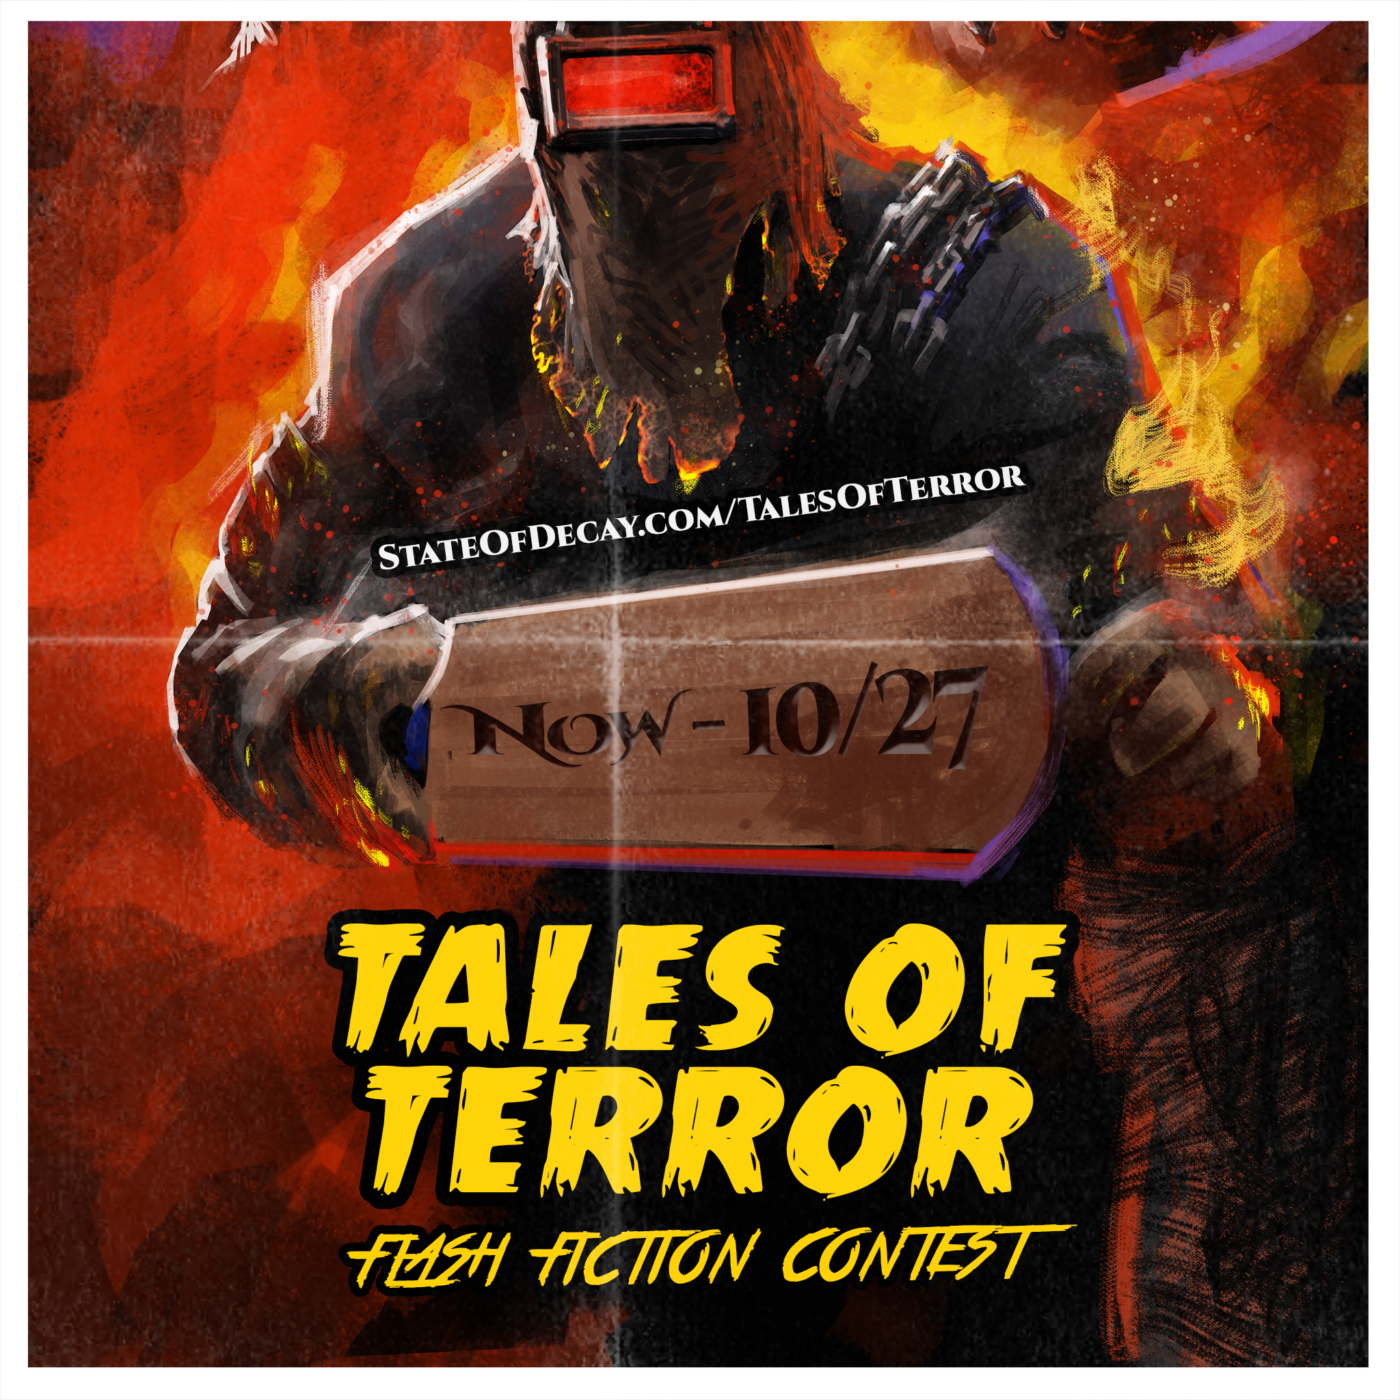 A spoof of a cult horror movie poster featuring a murderer wearing a welding mask and holding a wooden paddle. The title reads Tales of Terror Flash Fiction Contest which will run between now and Oct 27.